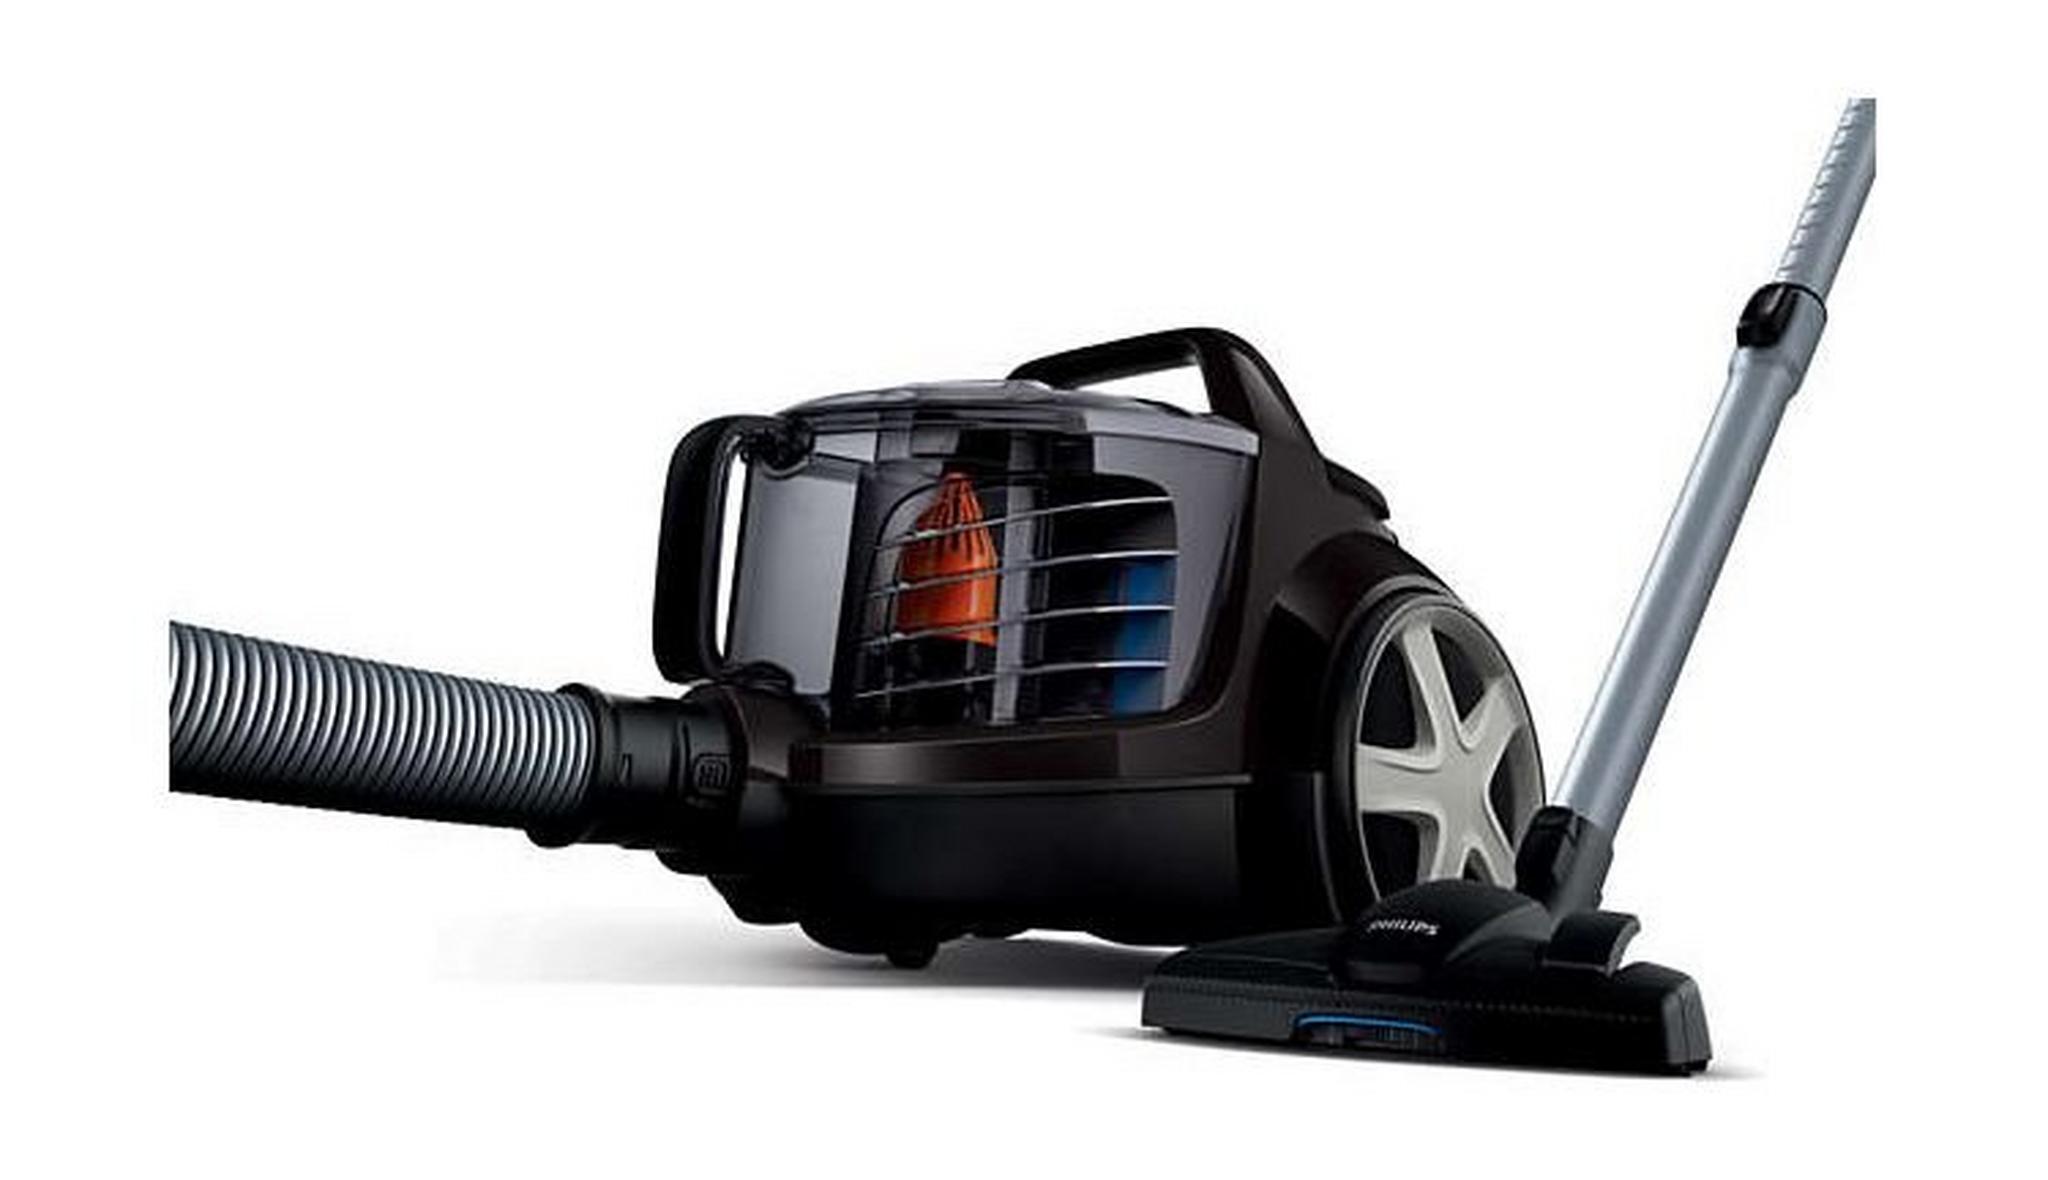 Philips 2000W 1.7L Vacuum Cleaner with PowerCyclone 4 Technology (FC8670) – Black